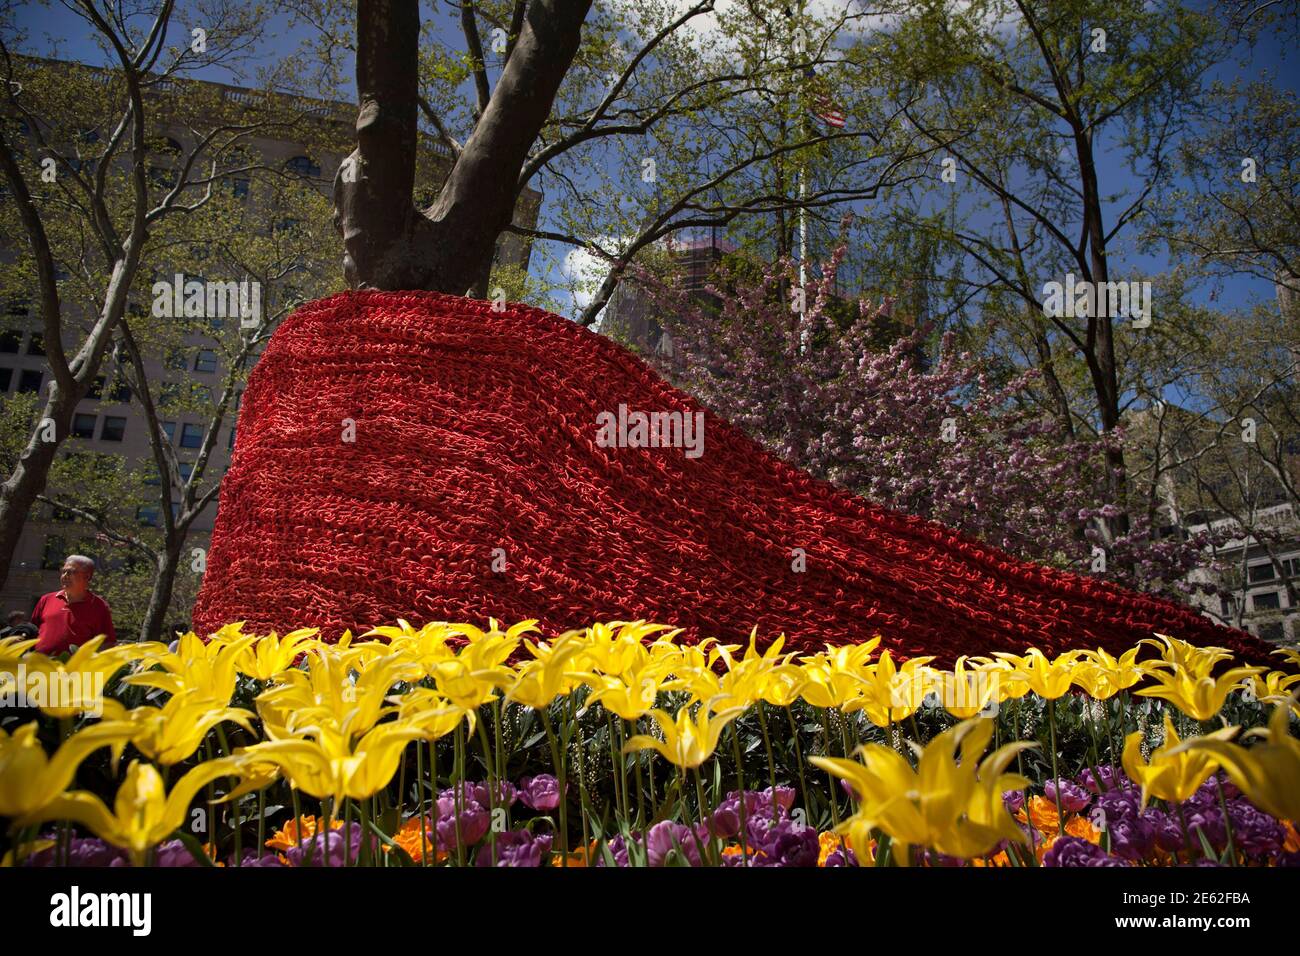 A man walks beside artist Orly Genger's art installation called 'Red, Yellow and Blue' (2013) in Madison Square Park, New York May 1, 2013. New York-based Genger presented her site-specific, large-scale art work, featuring colorfully-lined chambers of more than 1.4 million feet of painted, hand-knotted rope. REUTERS/Andrew Kelly (UNITED STATES - Tags: SOCIETY) Stock Photo